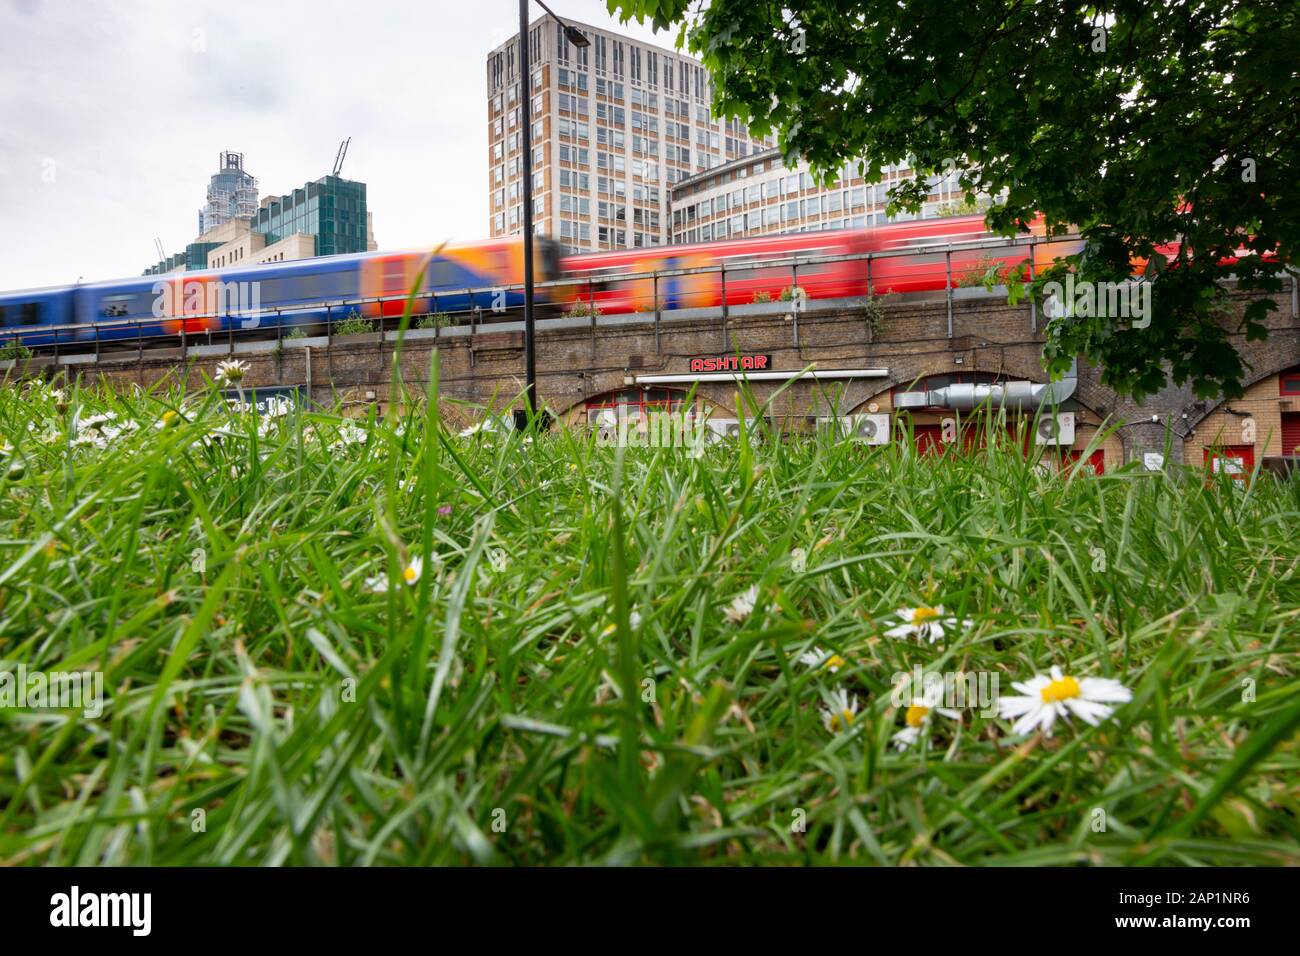 High rise buildings of the london district of Vauxhall overlook two speeding railway trains and Vauxhall Pleasure Gardens park. Stock Photo